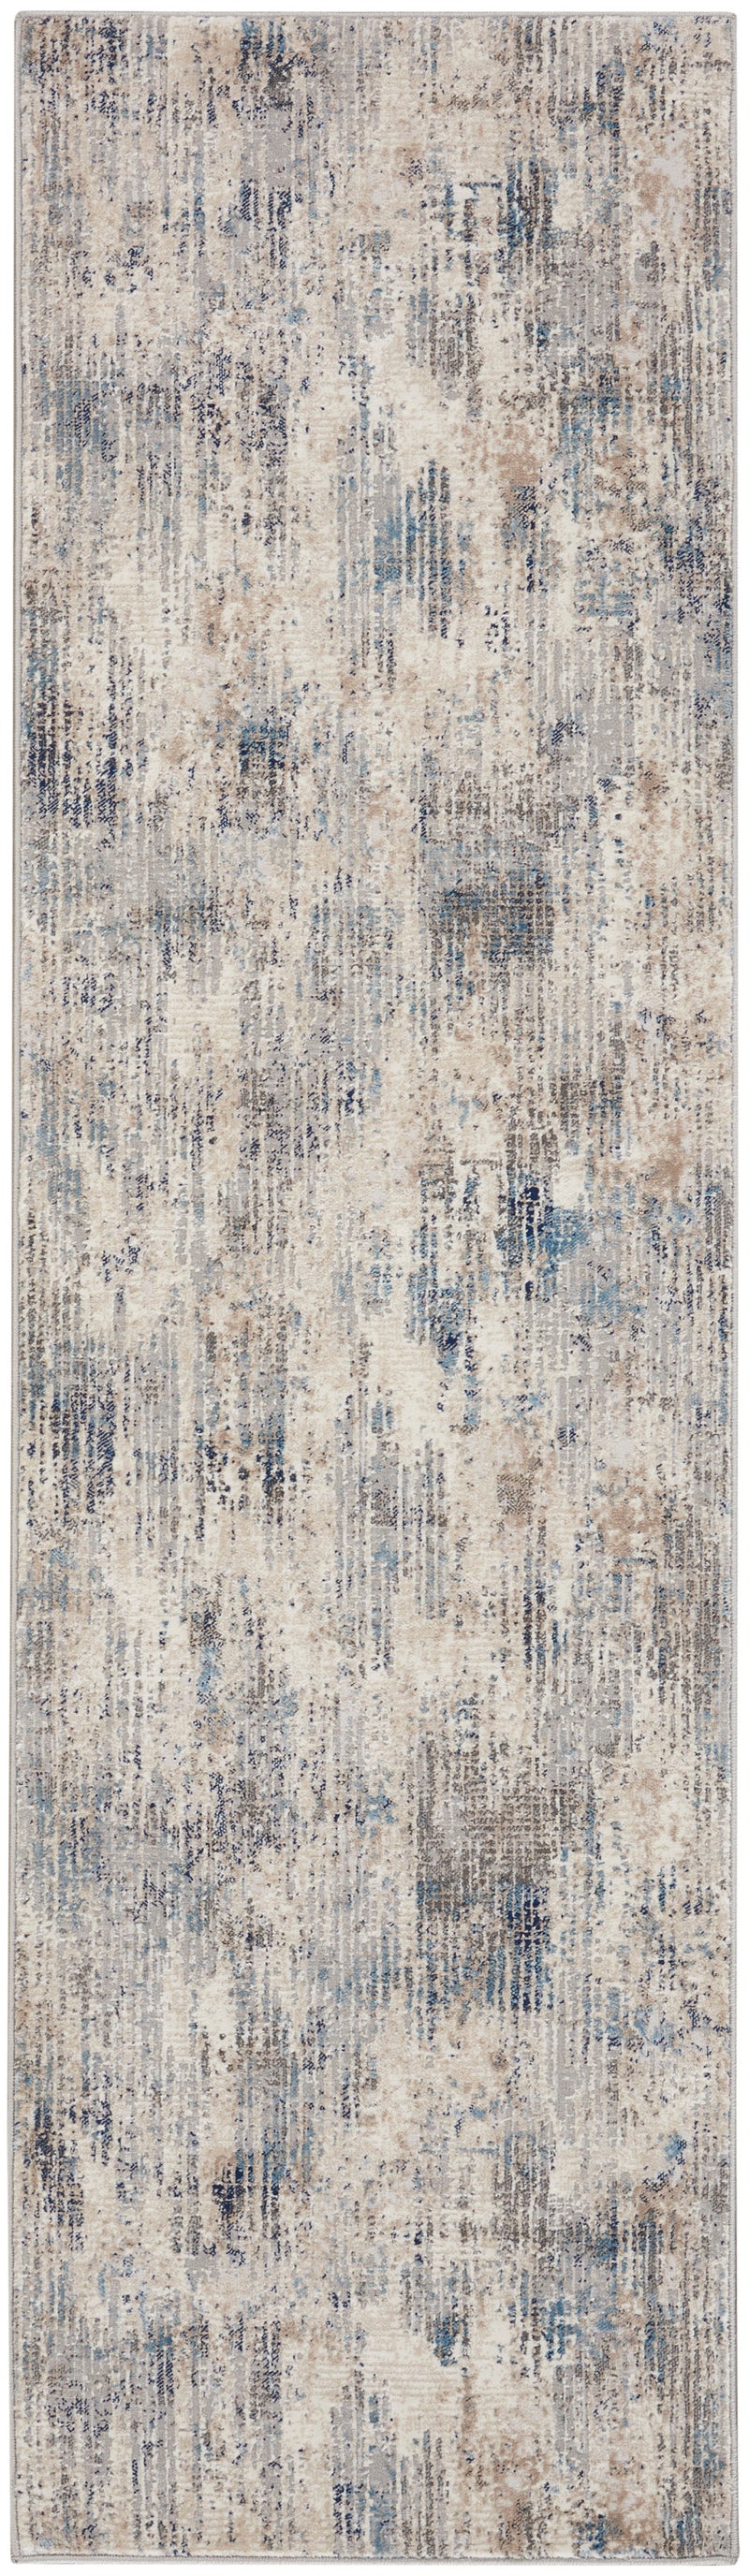 media image for ck022 infinity ivory grey blue rug by nourison 99446079213 redo 5 270